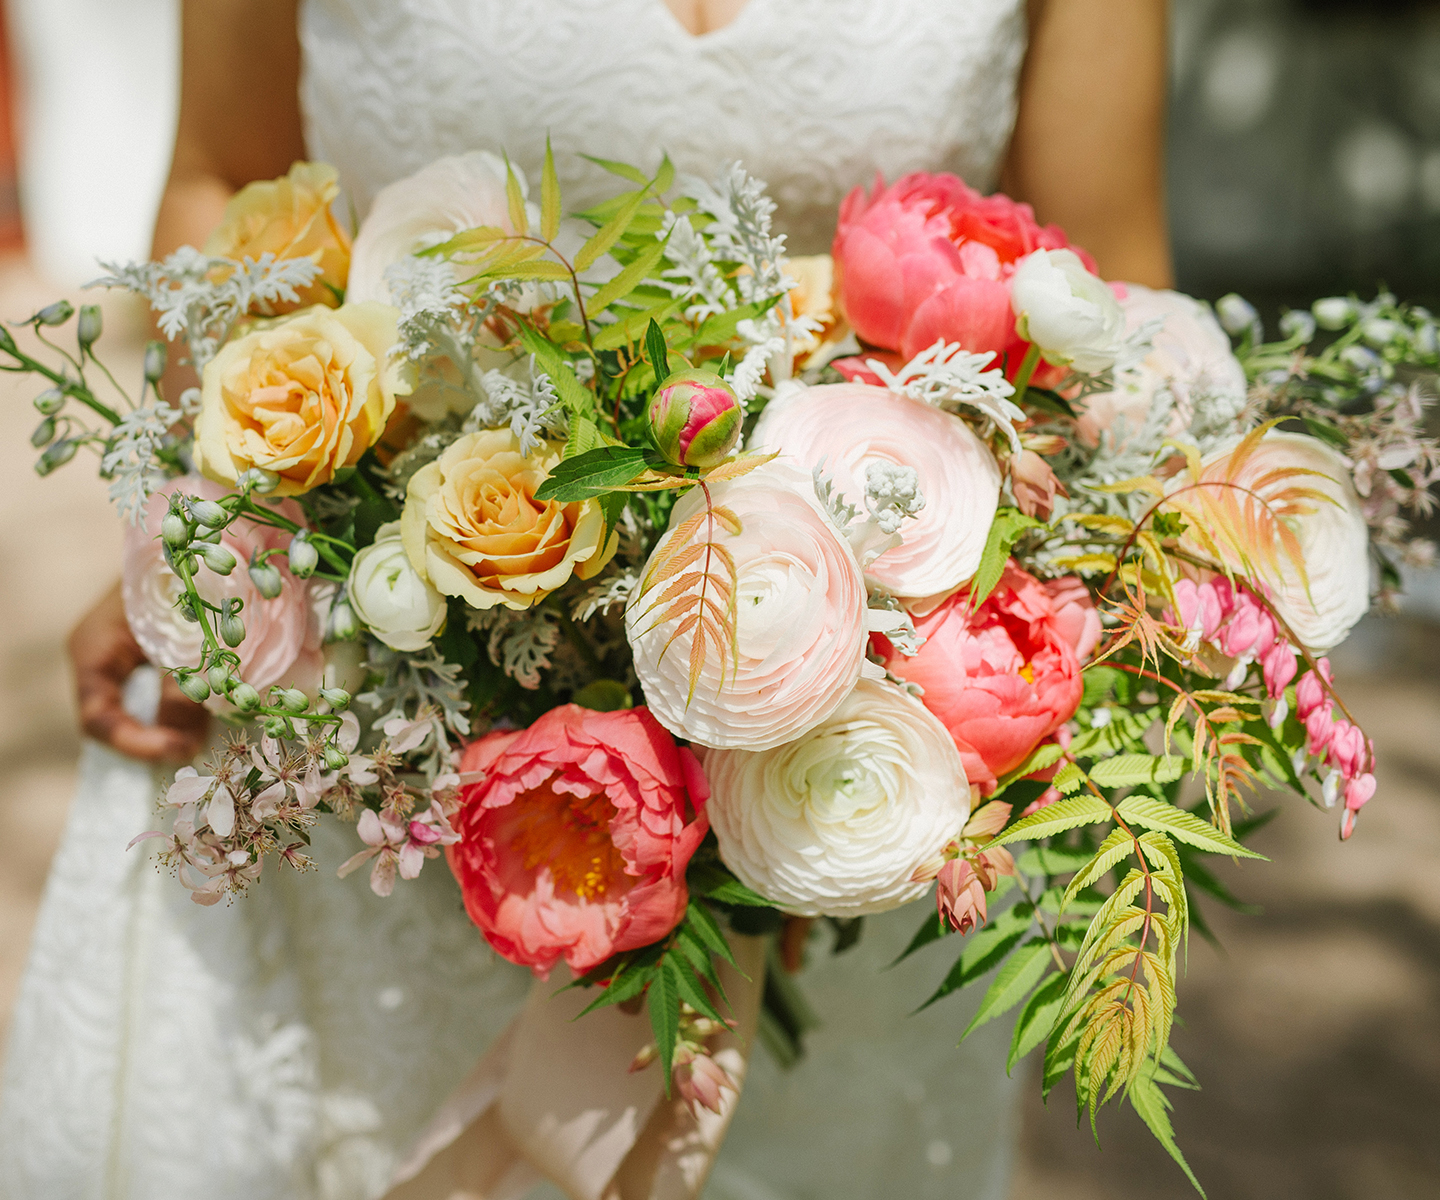 Bridal Bouquet Inspiration for Summer: 12 of the Prettiest Bouquets We've Seen This Summer in Alberta and the Rockies